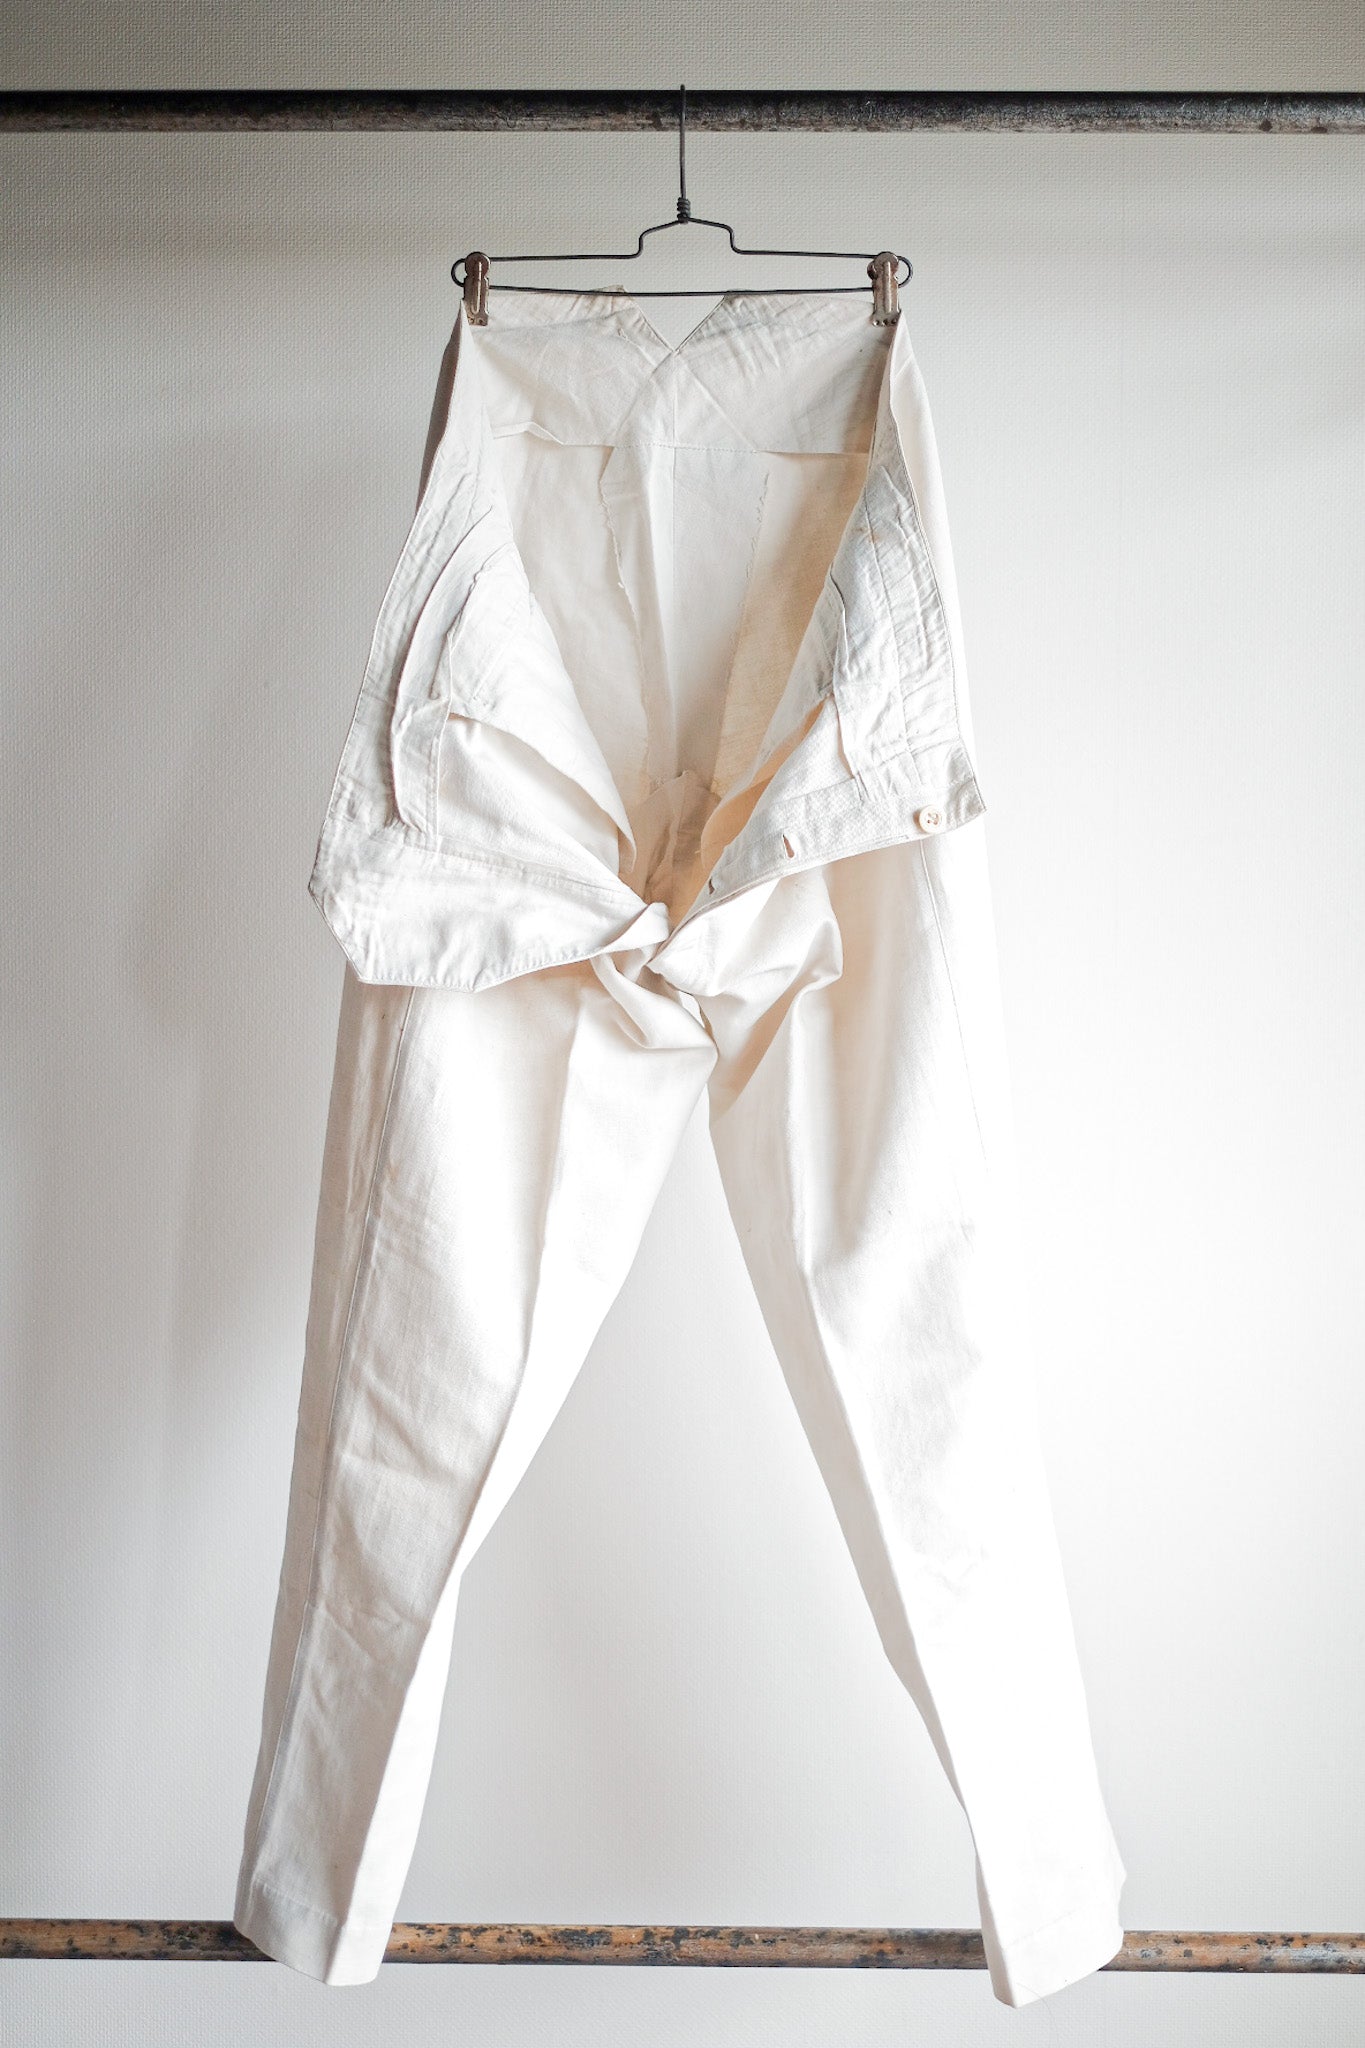 [~ 30's] French Vintage Linen Work Pants